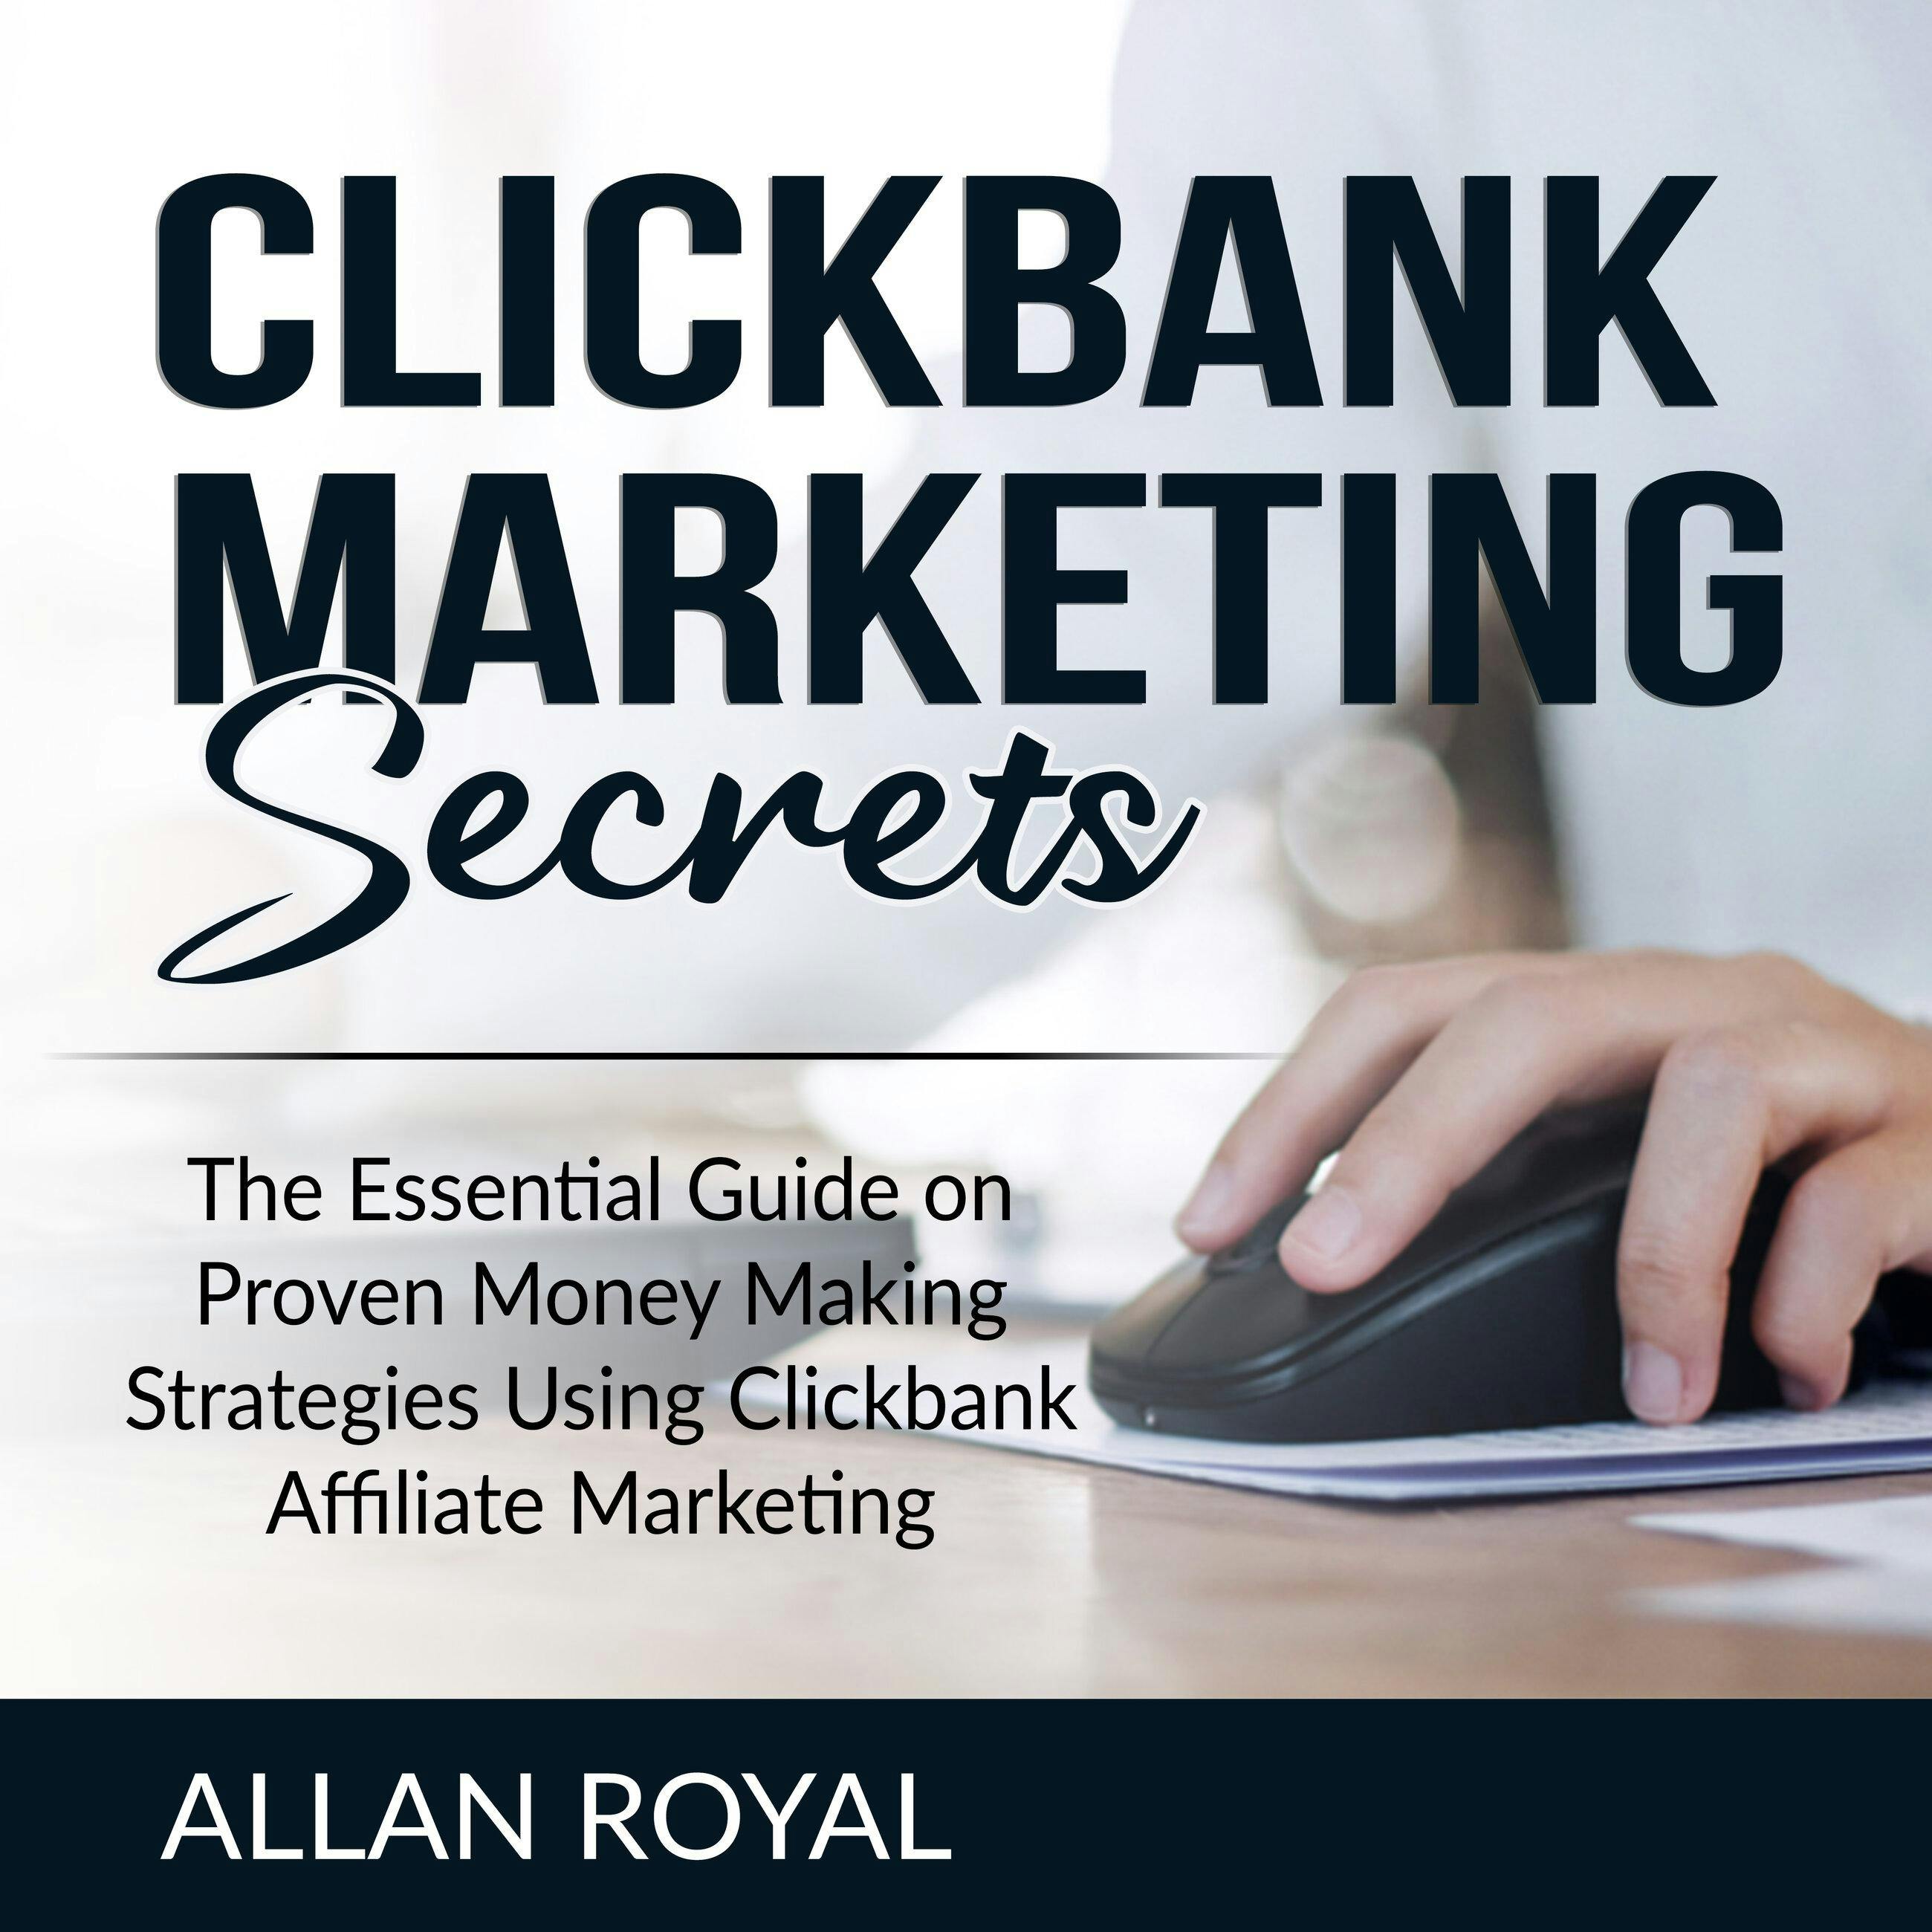 Clickbank Marketing Secrets: The Essential Guide on Proven Money Making Strategies Using Clickbank Affiliate Marketing - Allan Royal